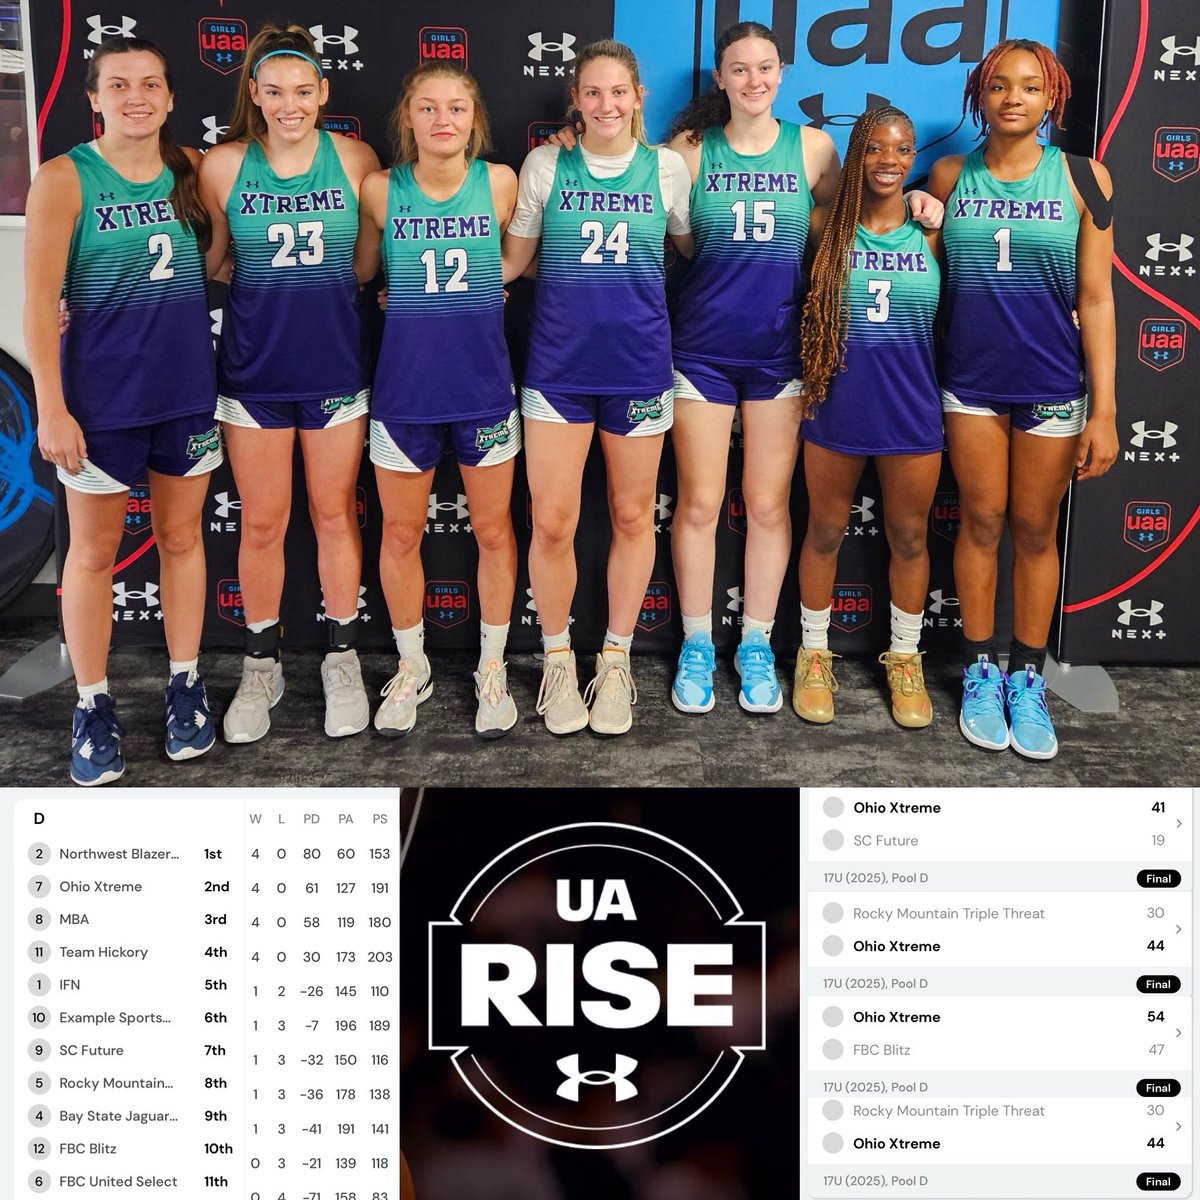 Ohio Xtreme UA RISE 17U went 4-0 at Session 1 - Spooky Nook Manheim, PA! 🏀🔥💯 #xtremelytalented Thank you to all the college coaches and evaluators that came to our games! @CBarwick_2 @ShockleeSydney @rileyminor12 @Jennaslates @Lori_Huffman15 @Sanaiiya1 @RiseCircuit @Isley23